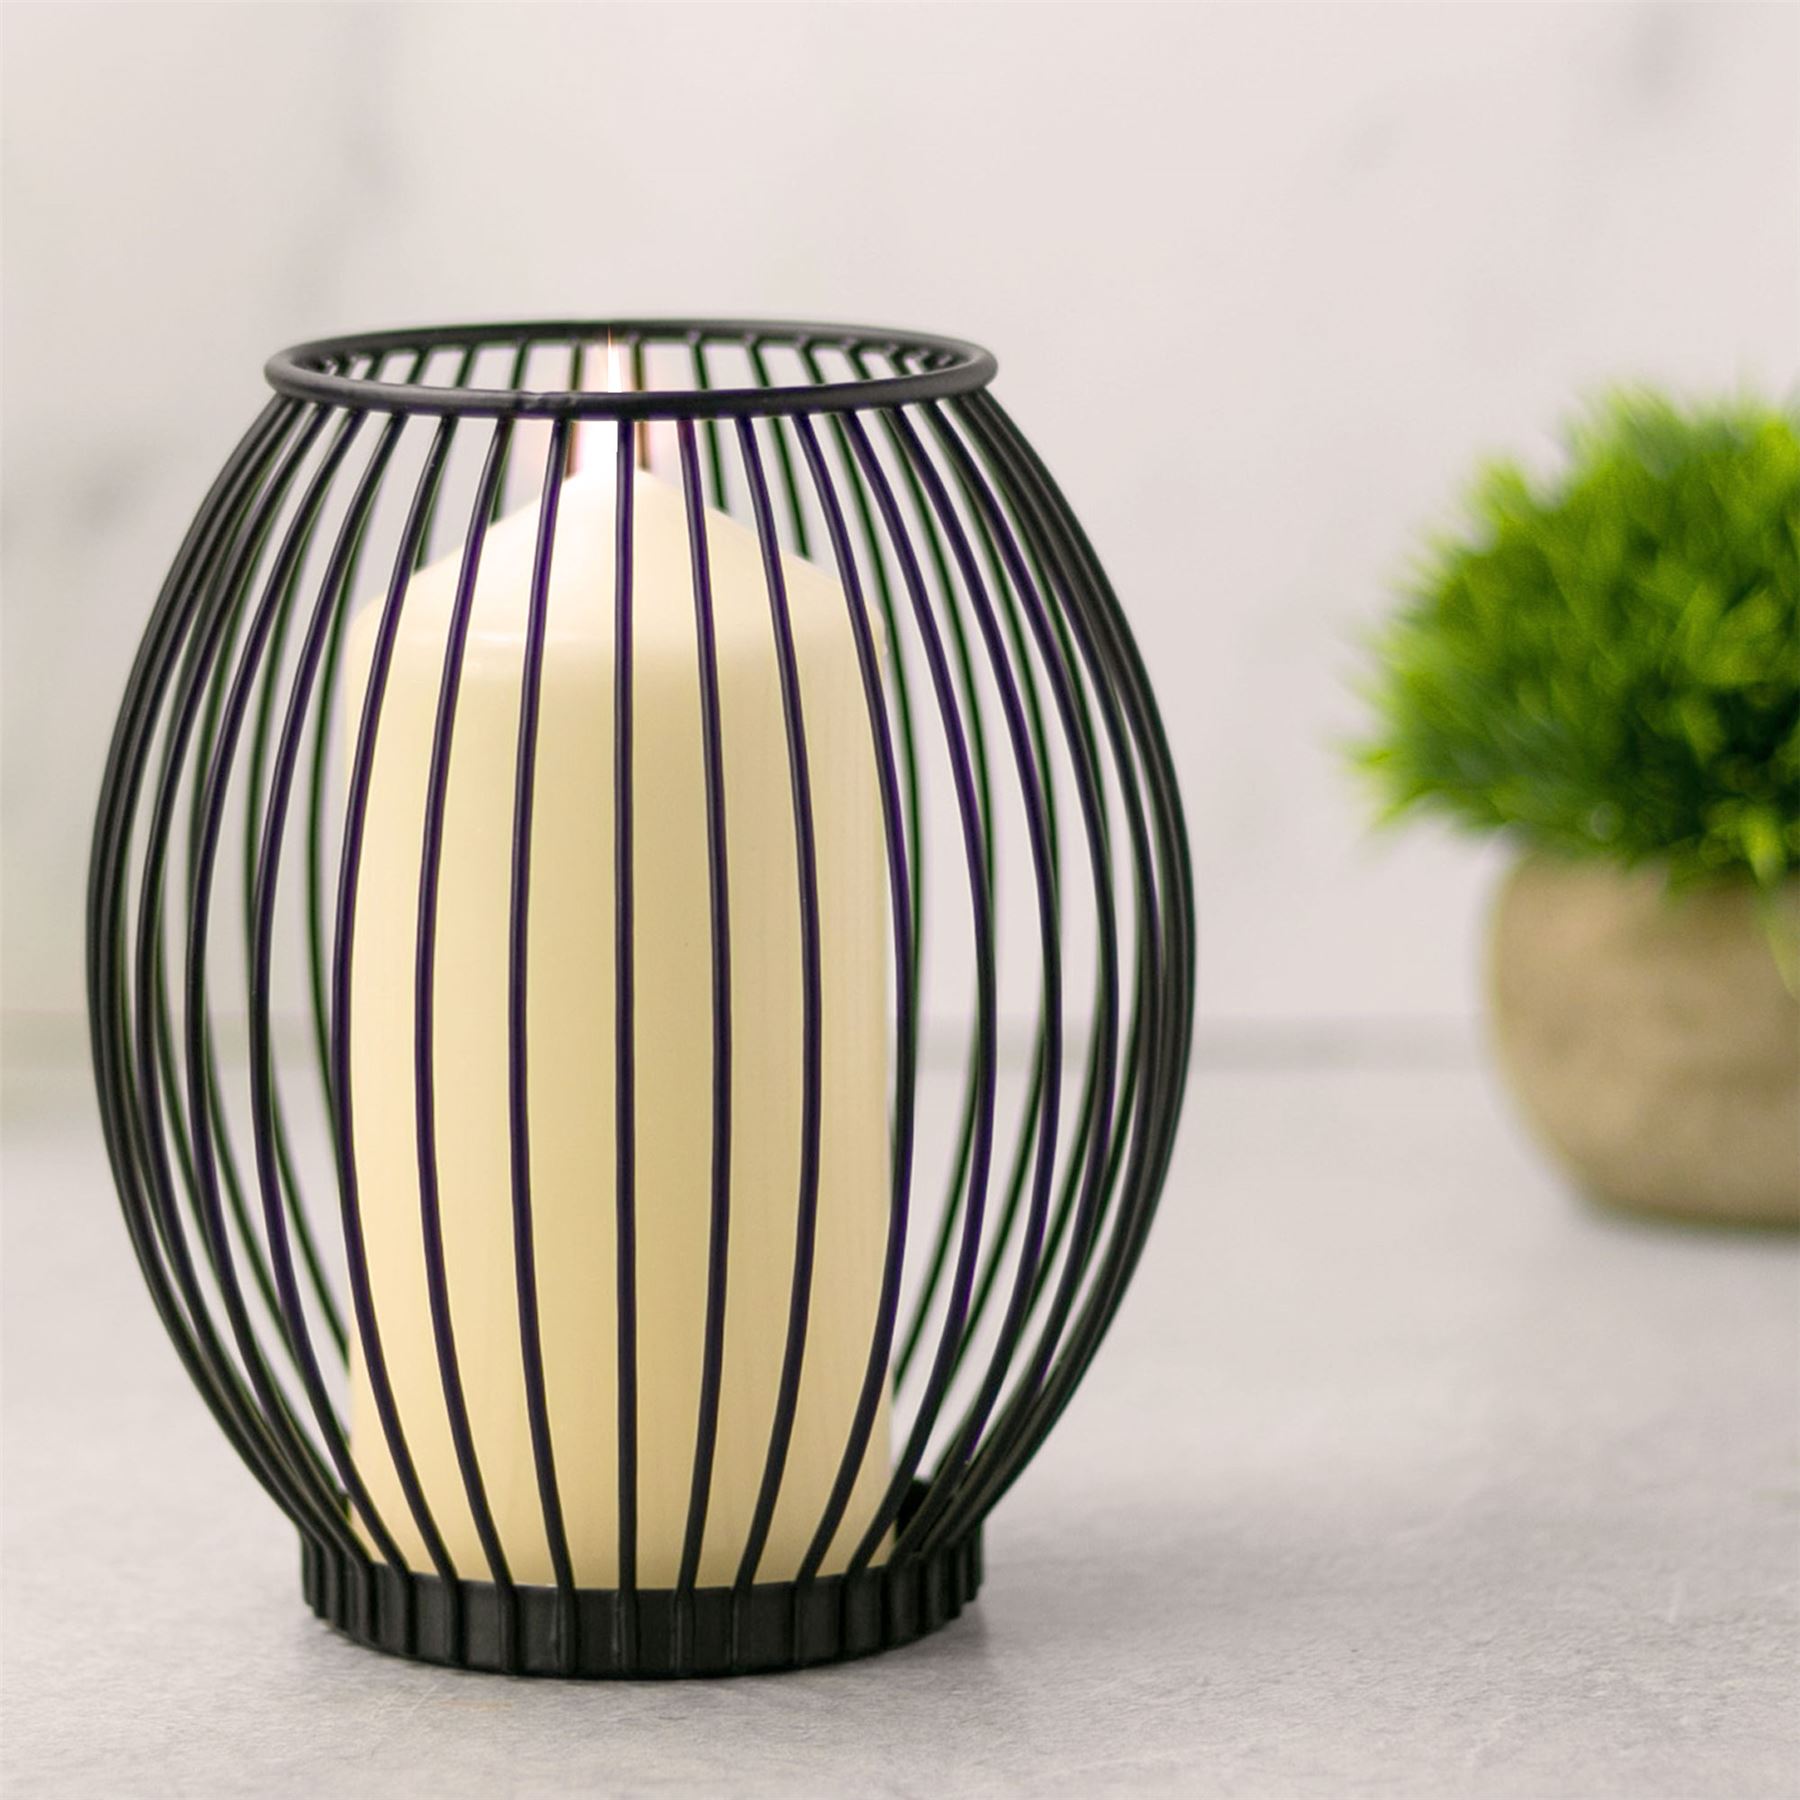 Cage Candle Holders - Set of 2 | M&W